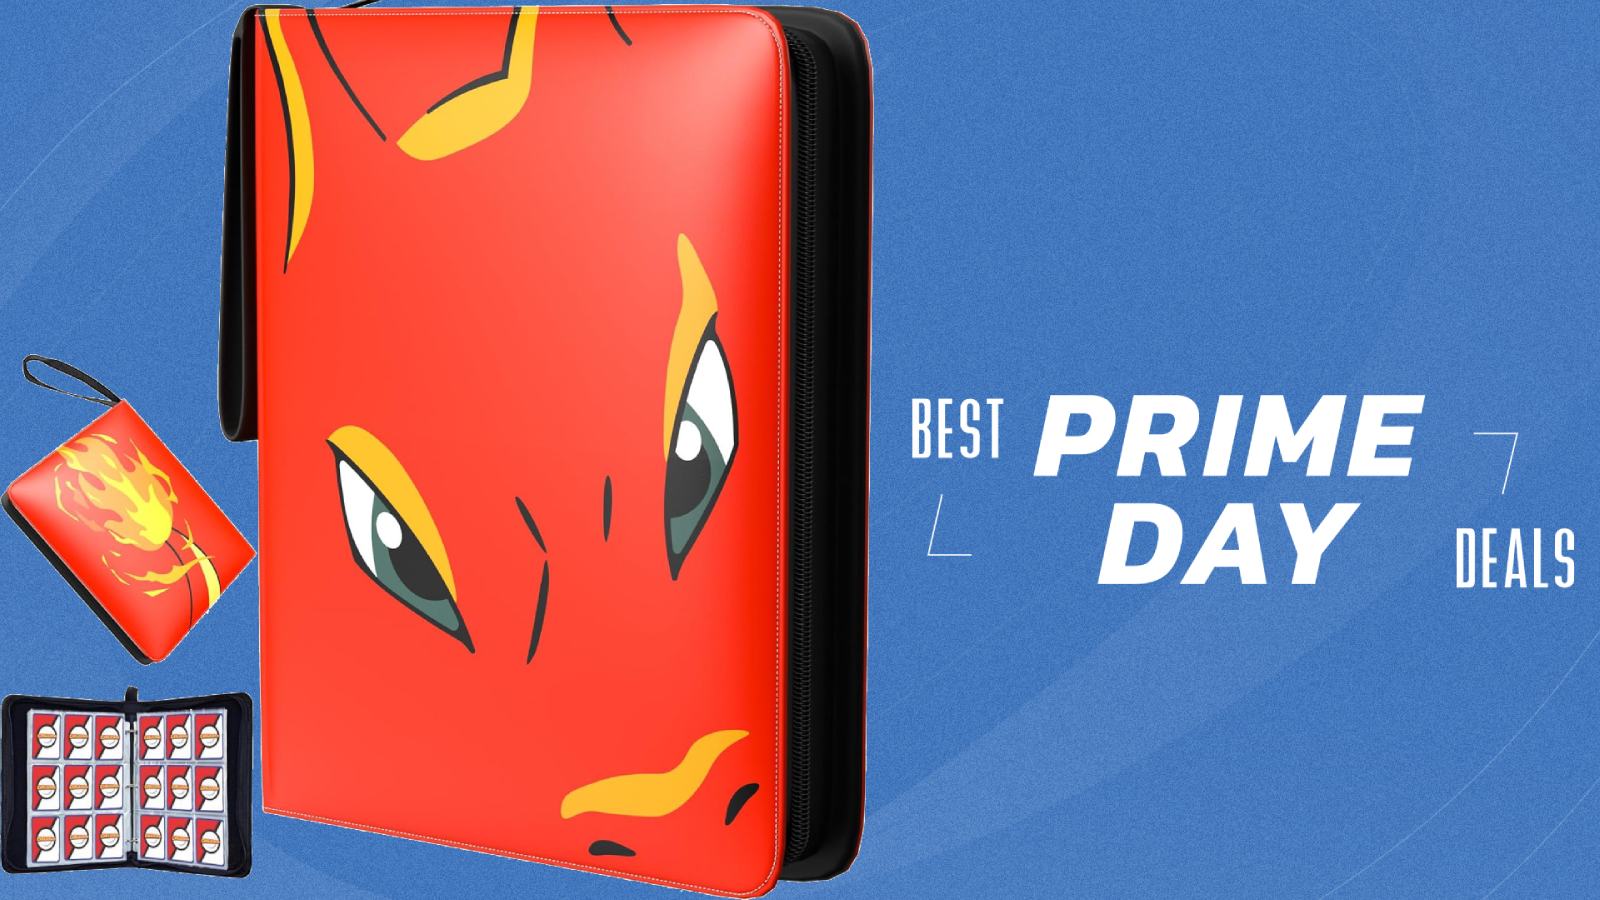 Pokemon TCG Binder on blue background with Prime Day deals lettering